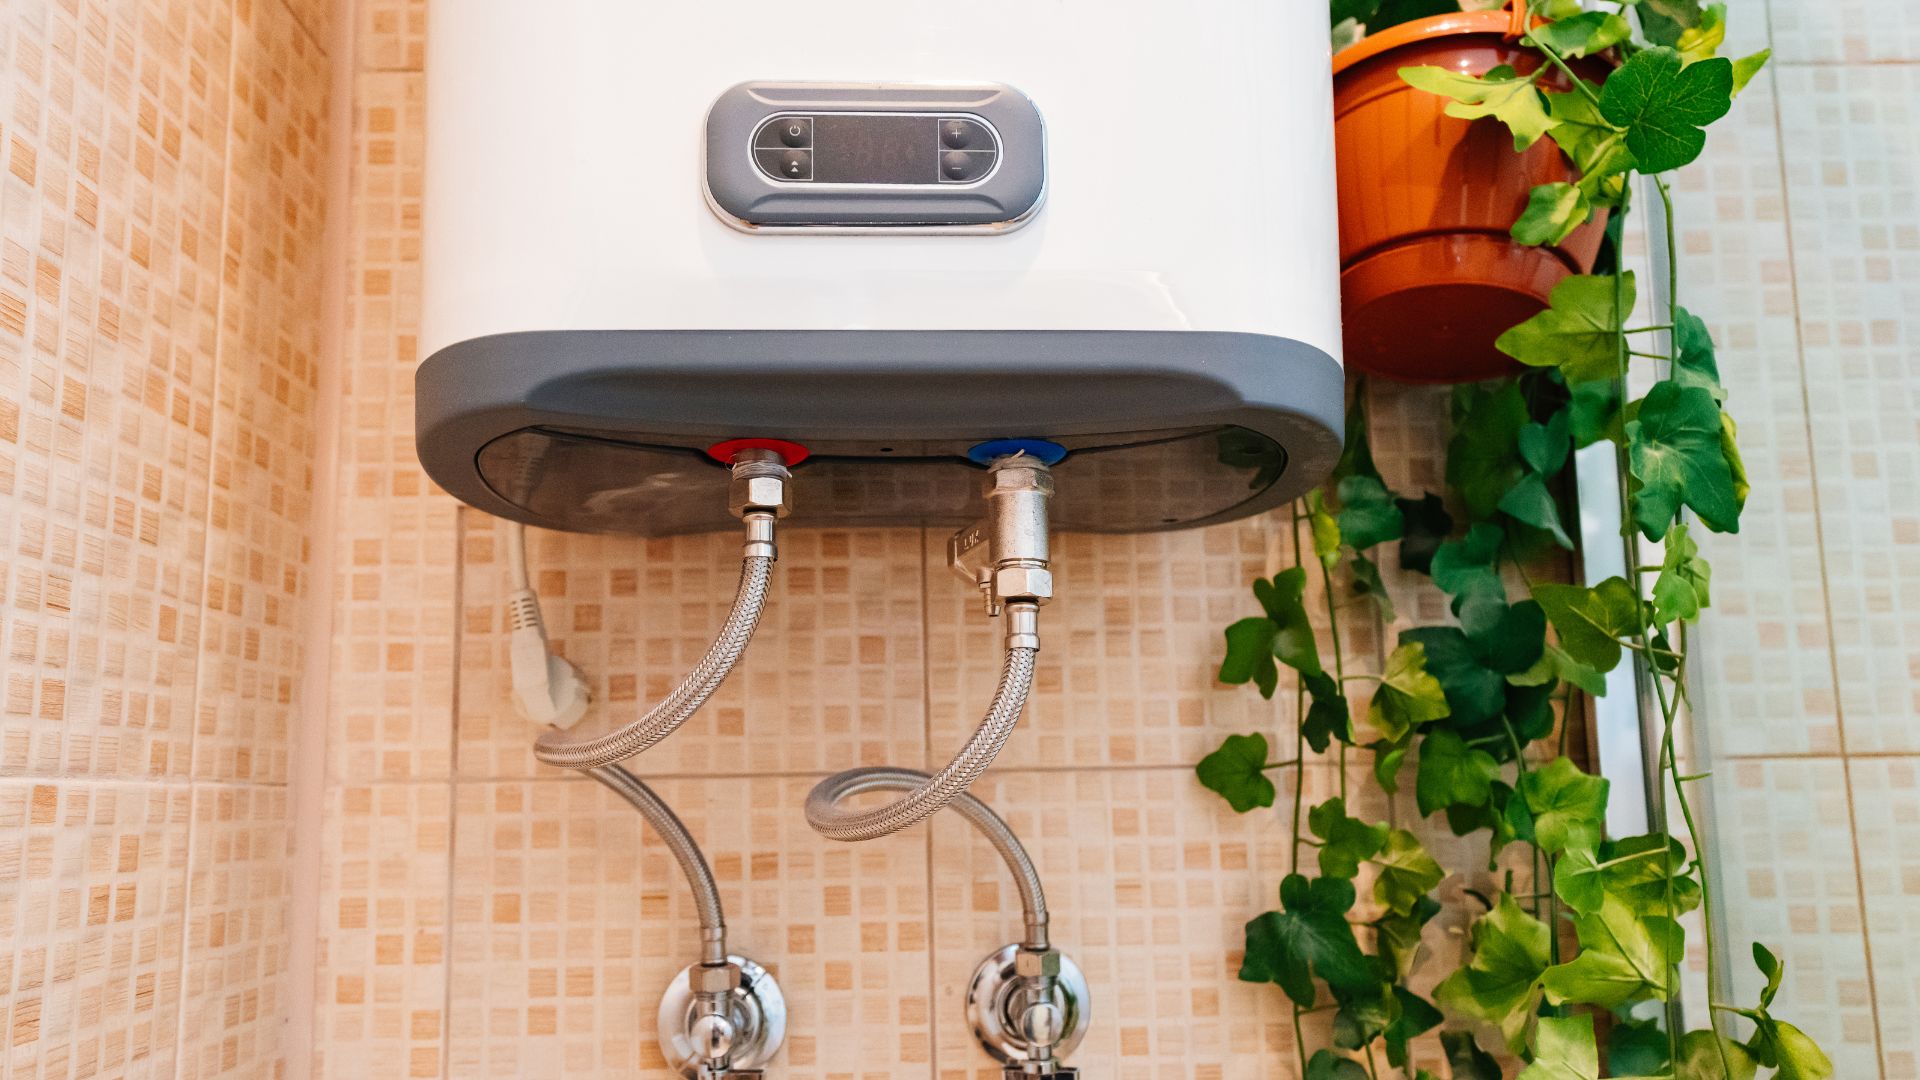 Electric Hot Water Heater With Plants